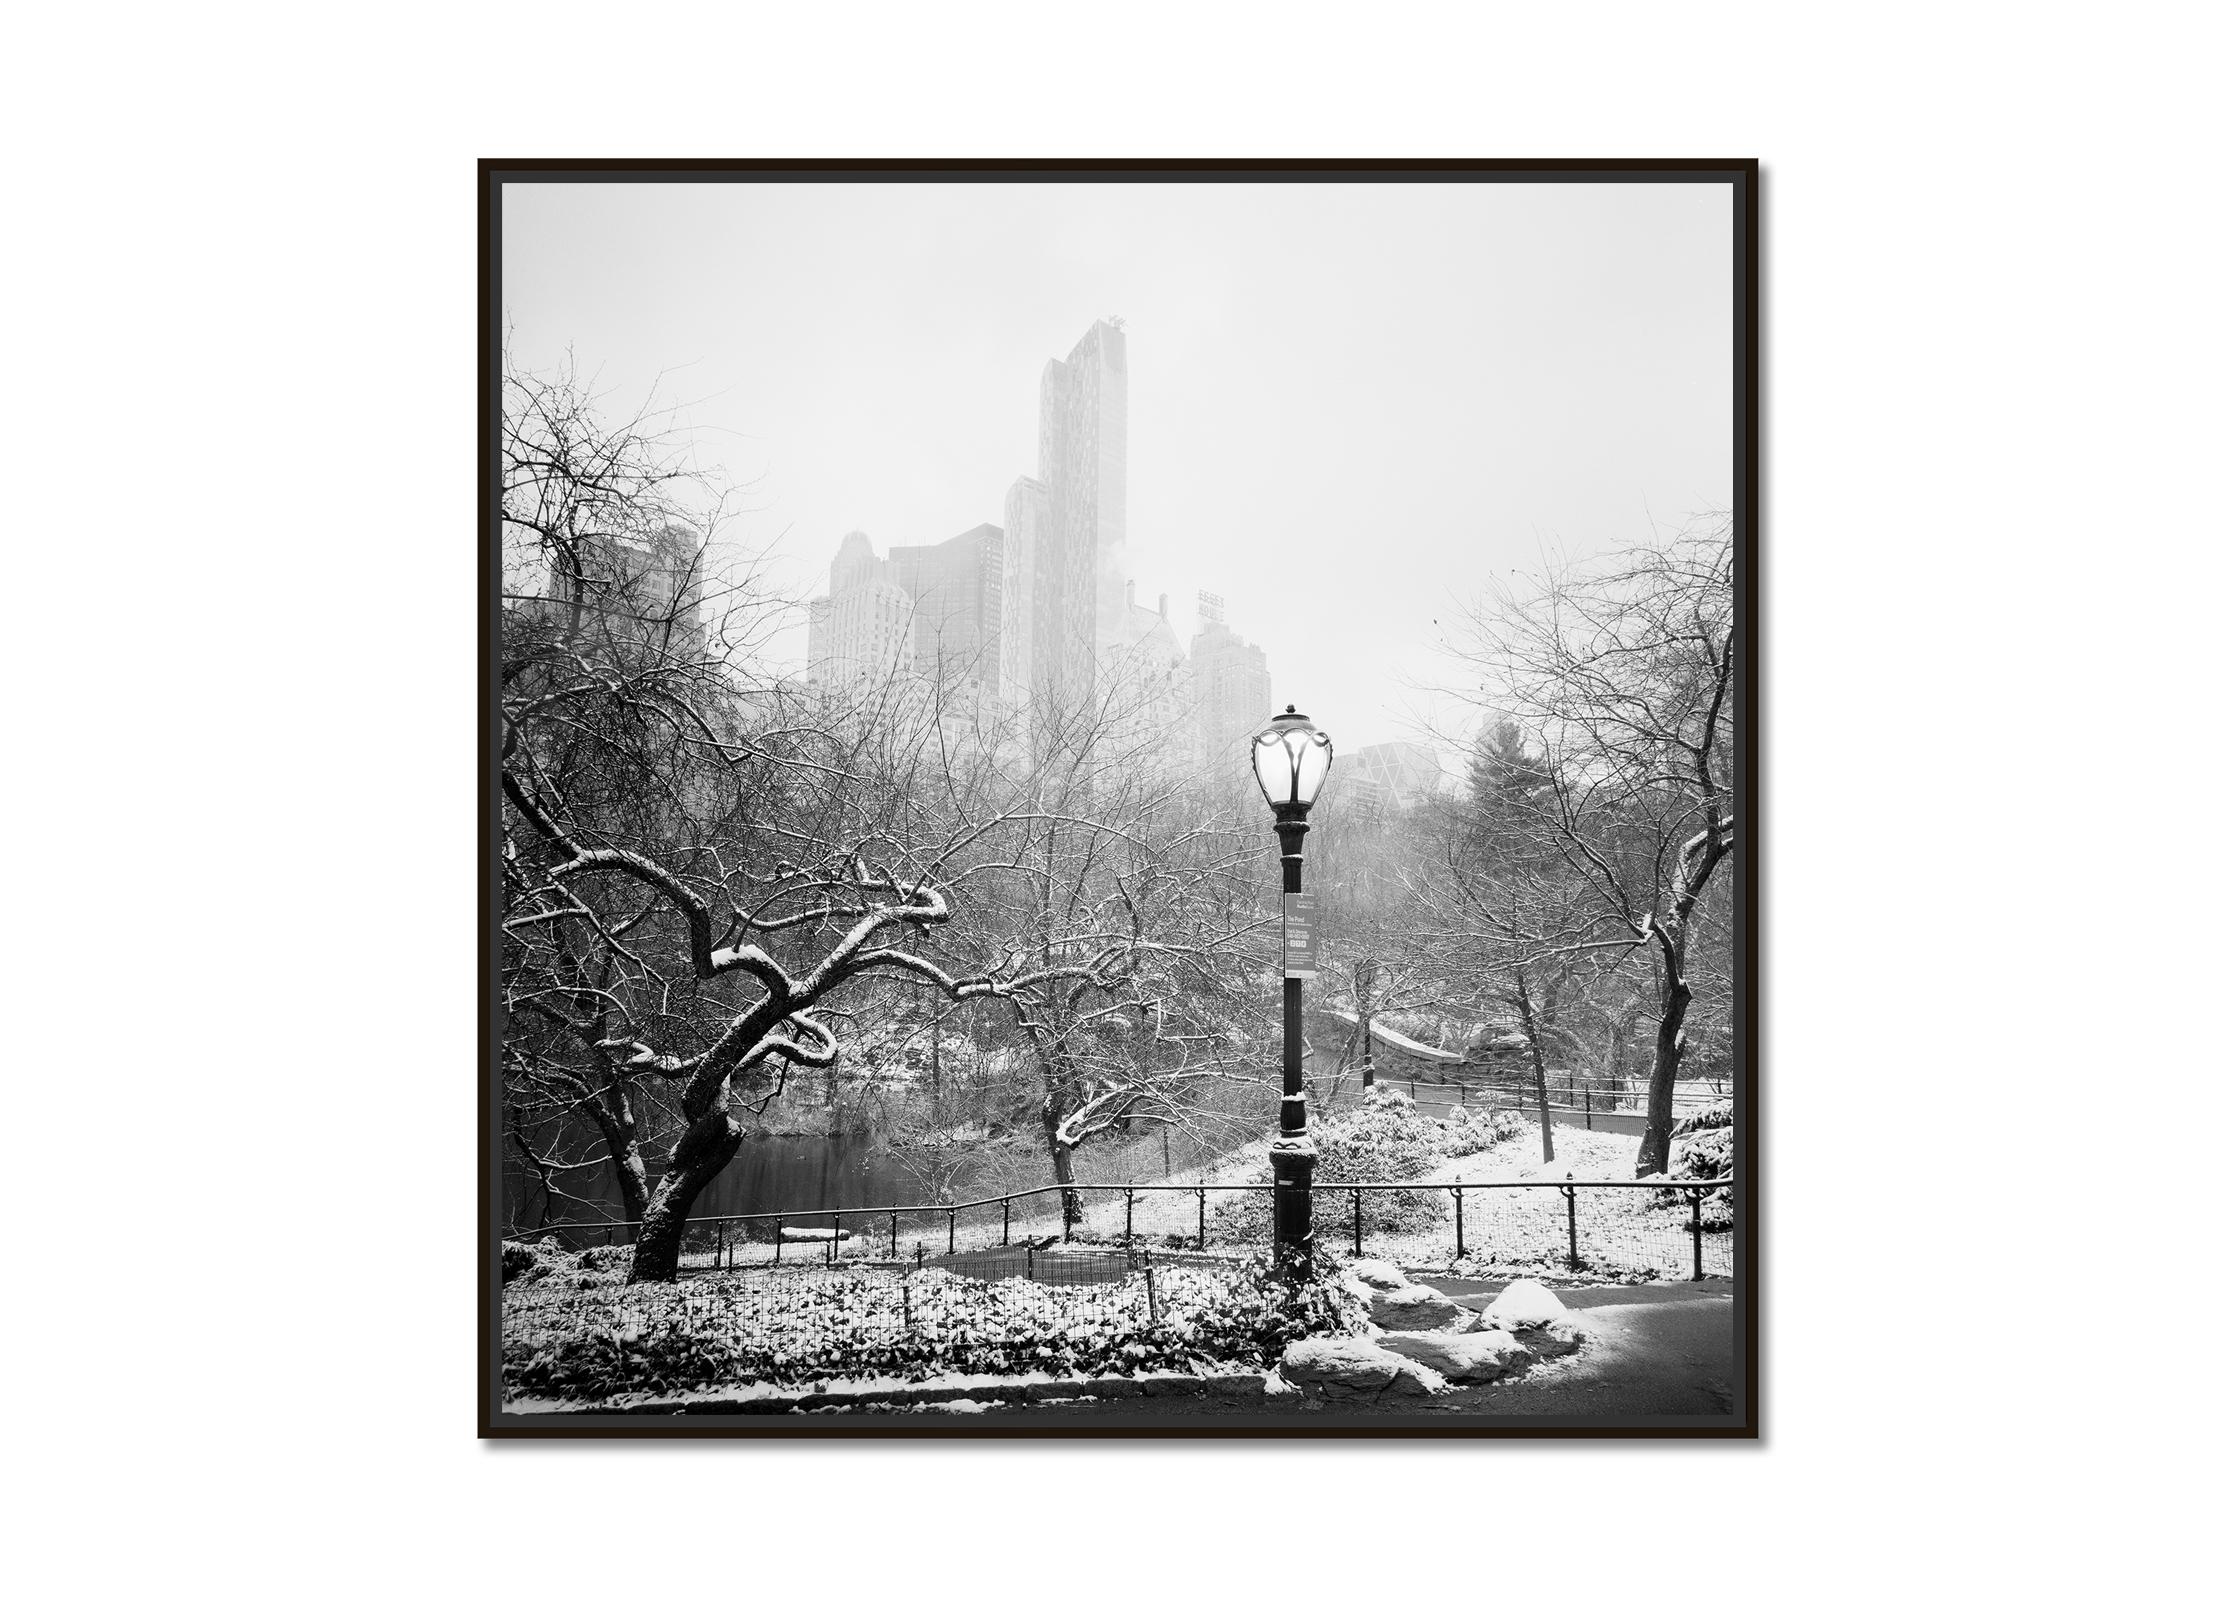 Snow covered Central Park, New York City  - Black and White fine art images - Photograph by Gerald Berghammer